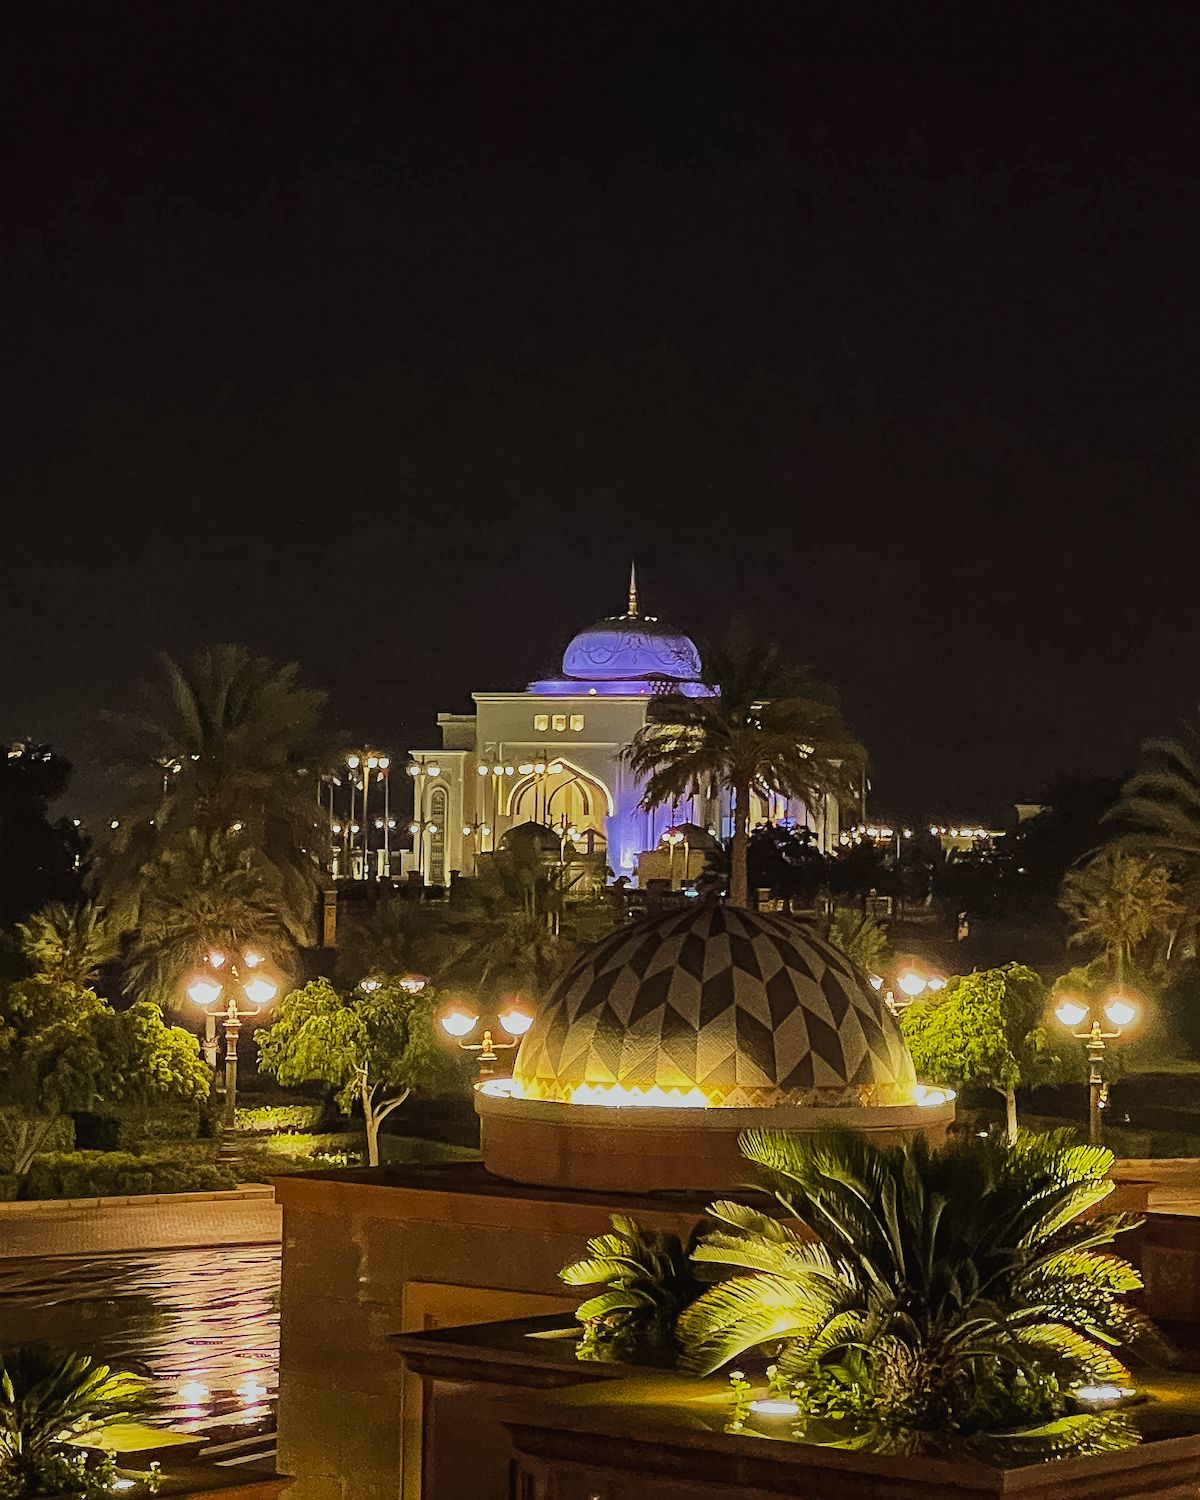 Outside of Emirates Palace Mandarin Oriental with its lit up purple dome at nighttime